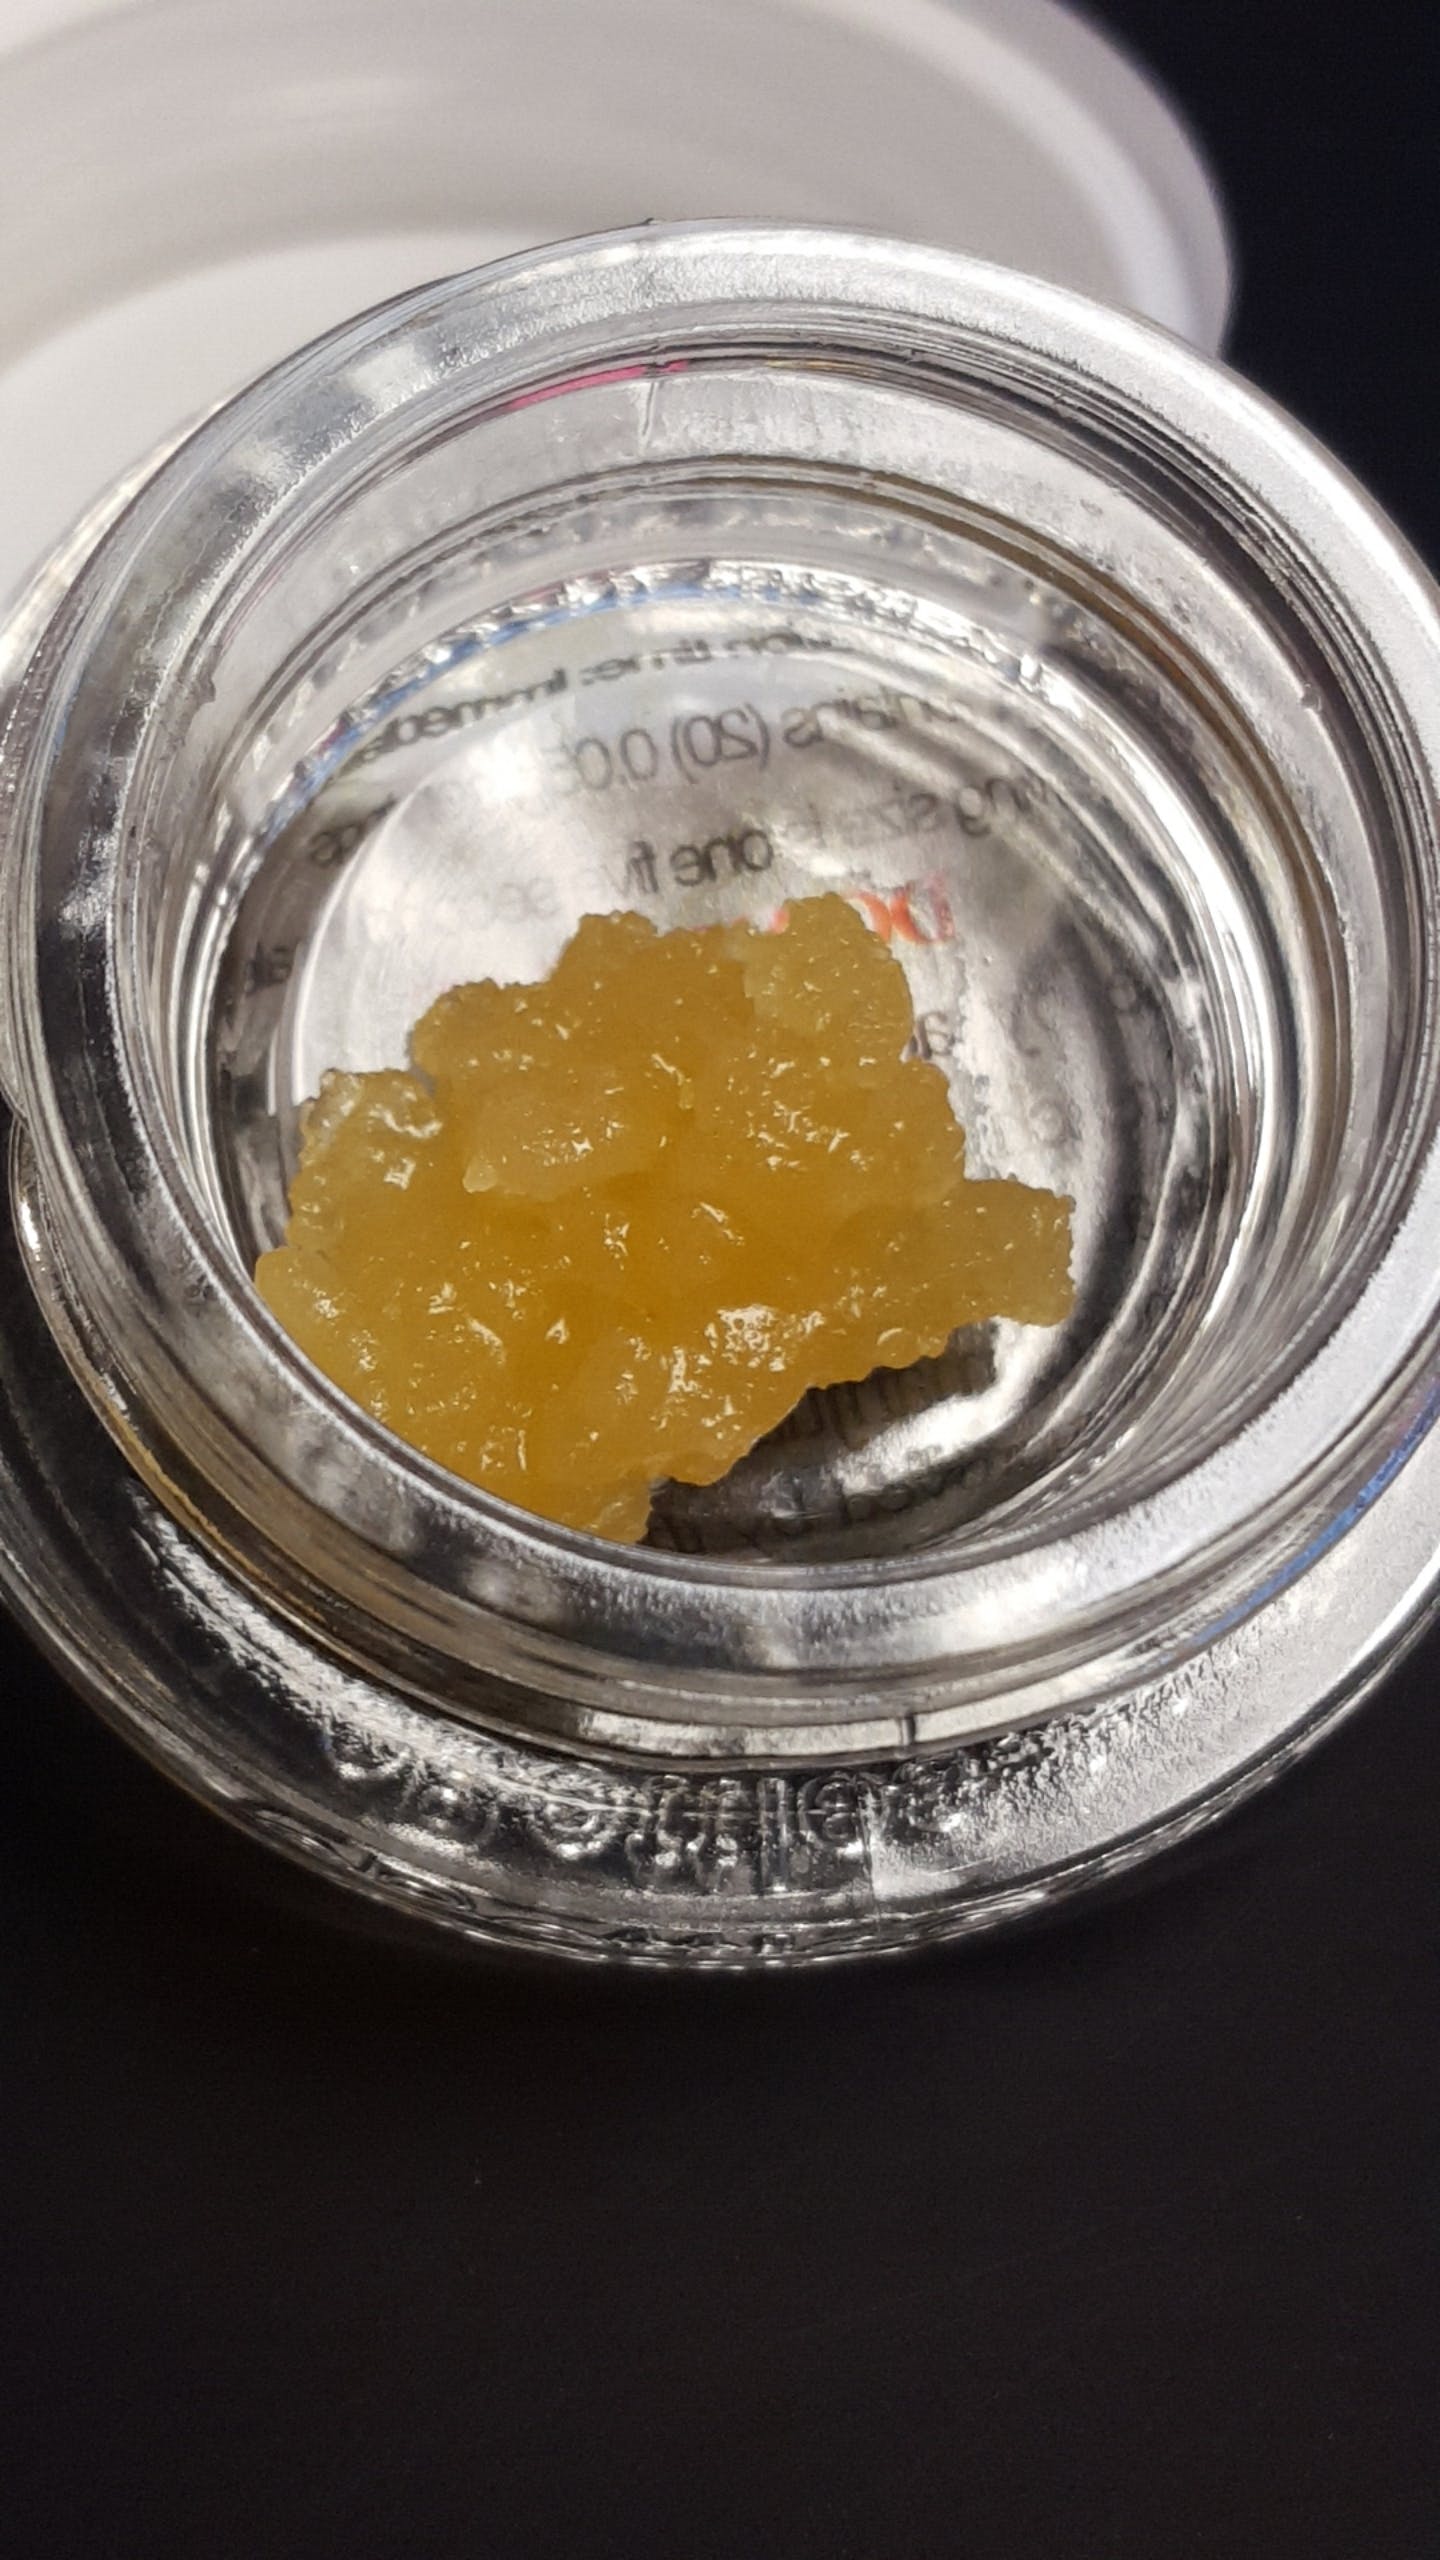 concentrate-oregon-genetics-ck-x-red-purps-live-resin